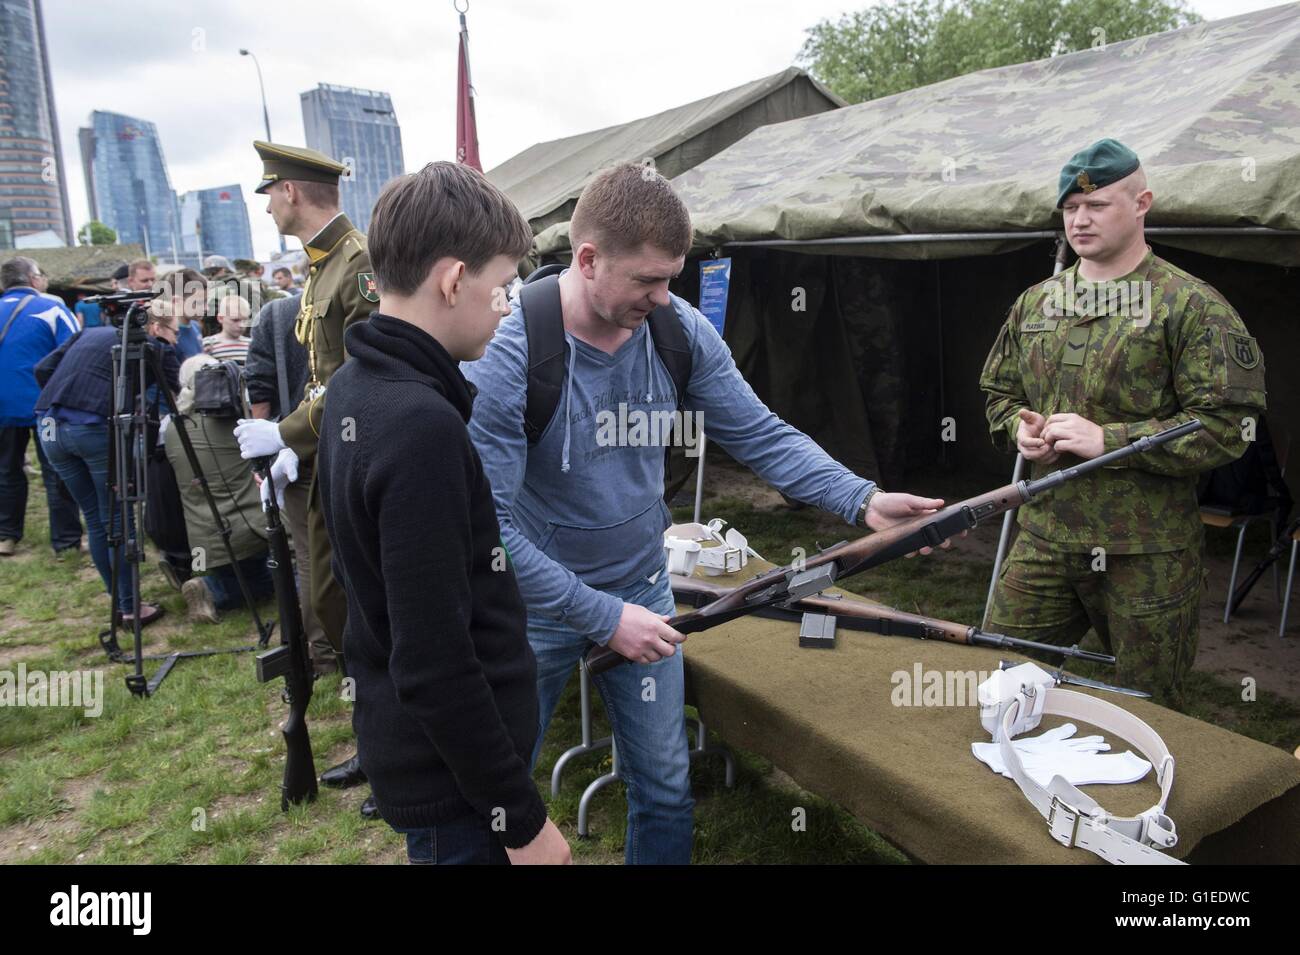 Vilnius, Lithuania. 14th May, 2016. People are viewing weapons in Vilnius, Lithuania, May 14, 2016. Lithuania celebrates Armed Forces and Public Unity Day in it's captial on Saturday. Troops of Lithuania, Germany, U.S., Luxembourg, Portugal, etc. brought their light weapons, military vehicles and other equipment to the public. Fighting Falcon F-16 of Portuguese air force and Black Hawk of the U.S. air force participated in the performance. Credit:  Alfredas Pliadis/Xinhua/Alamy Live News Stock Photo